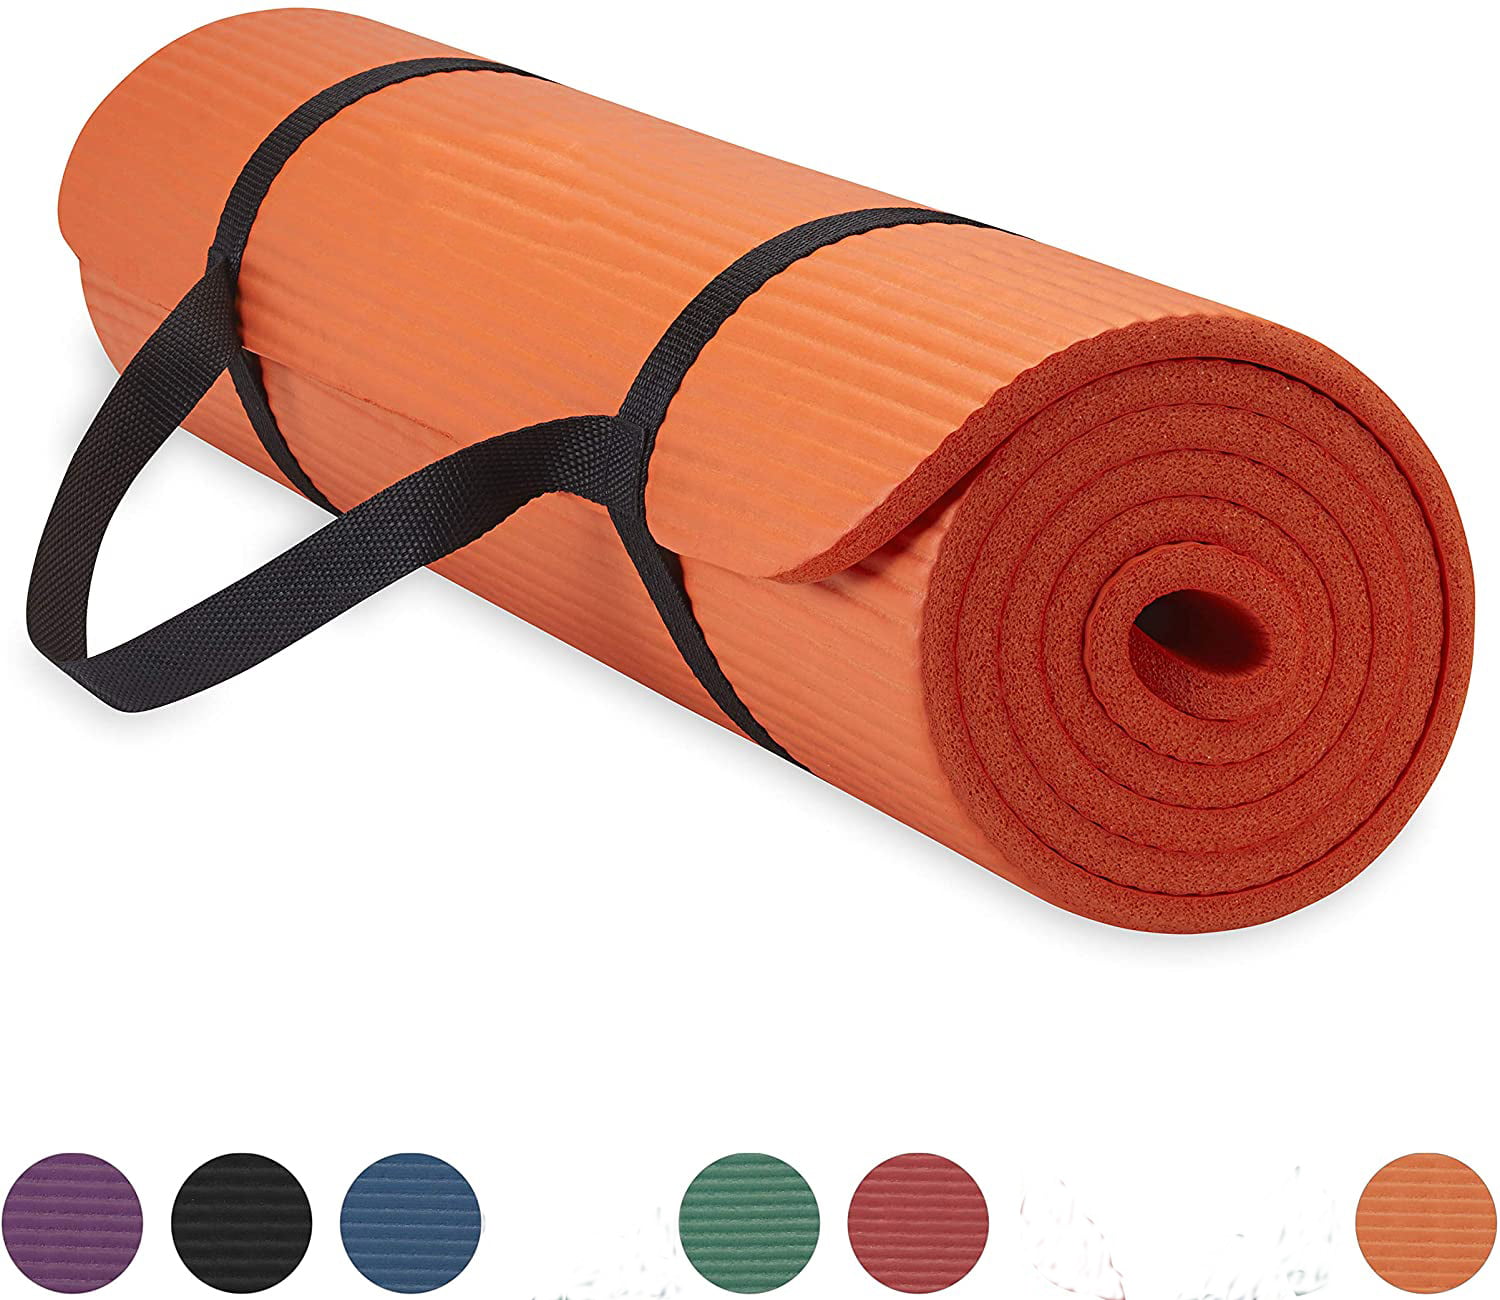 Sunny Exercise Mat Thick High Density Exercise Yoga Mat with Carry Strap Size 71 24 